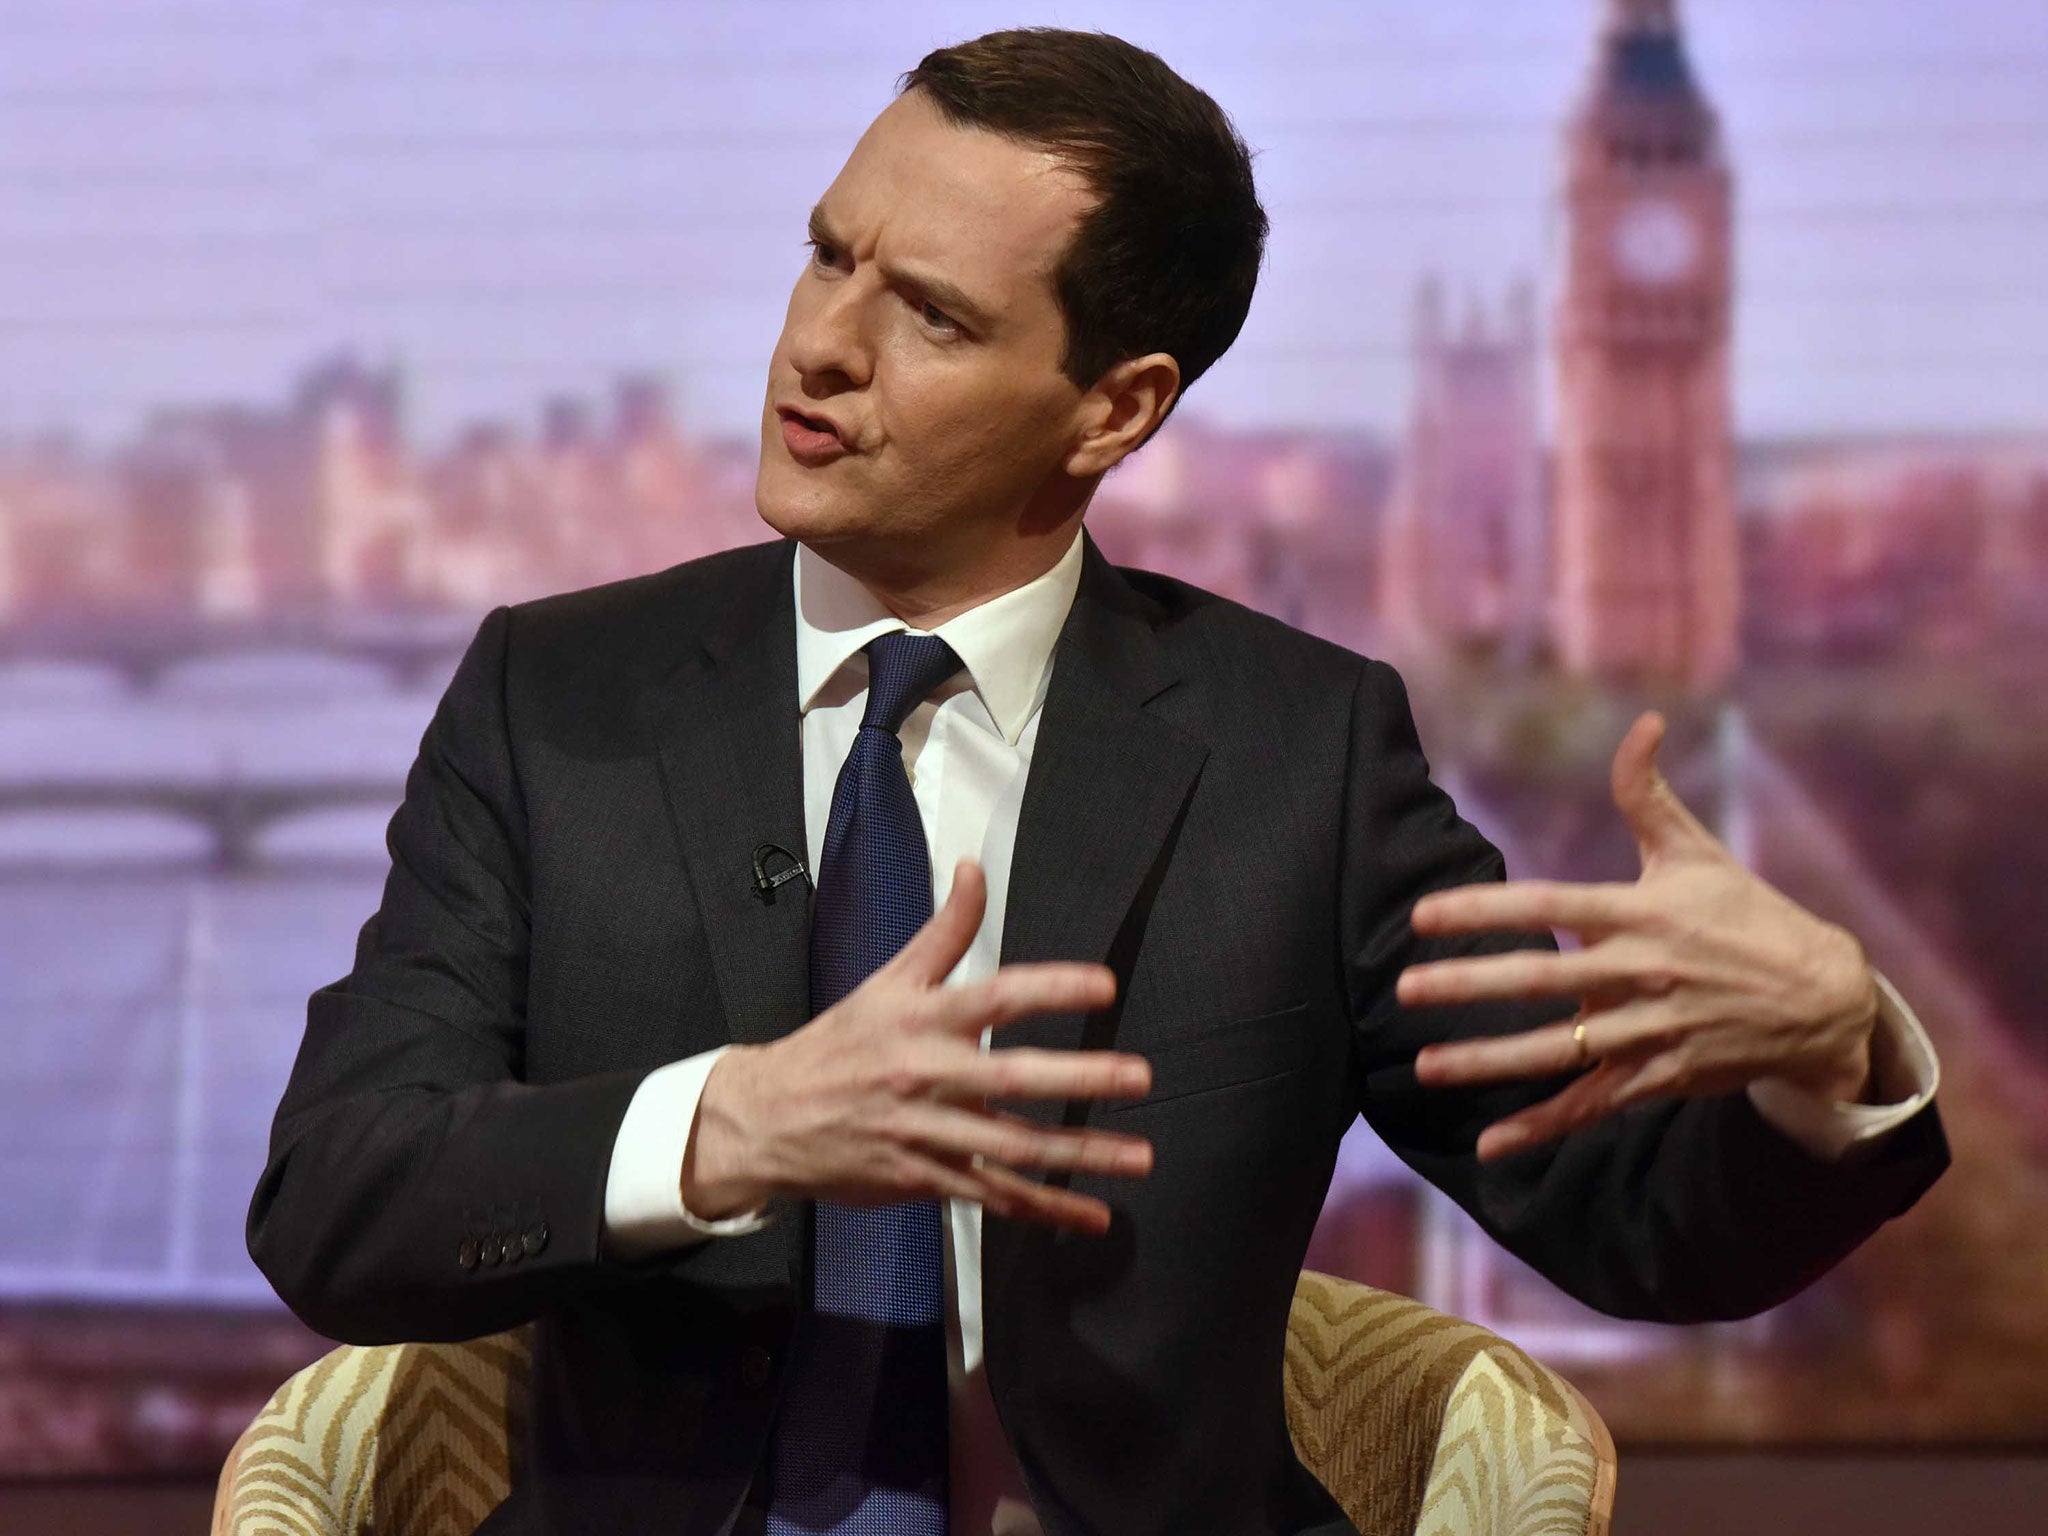 George Osborne on ‘The Andrew Marr Show’ where he reacted coolly to calls for the Living Wage to be extended